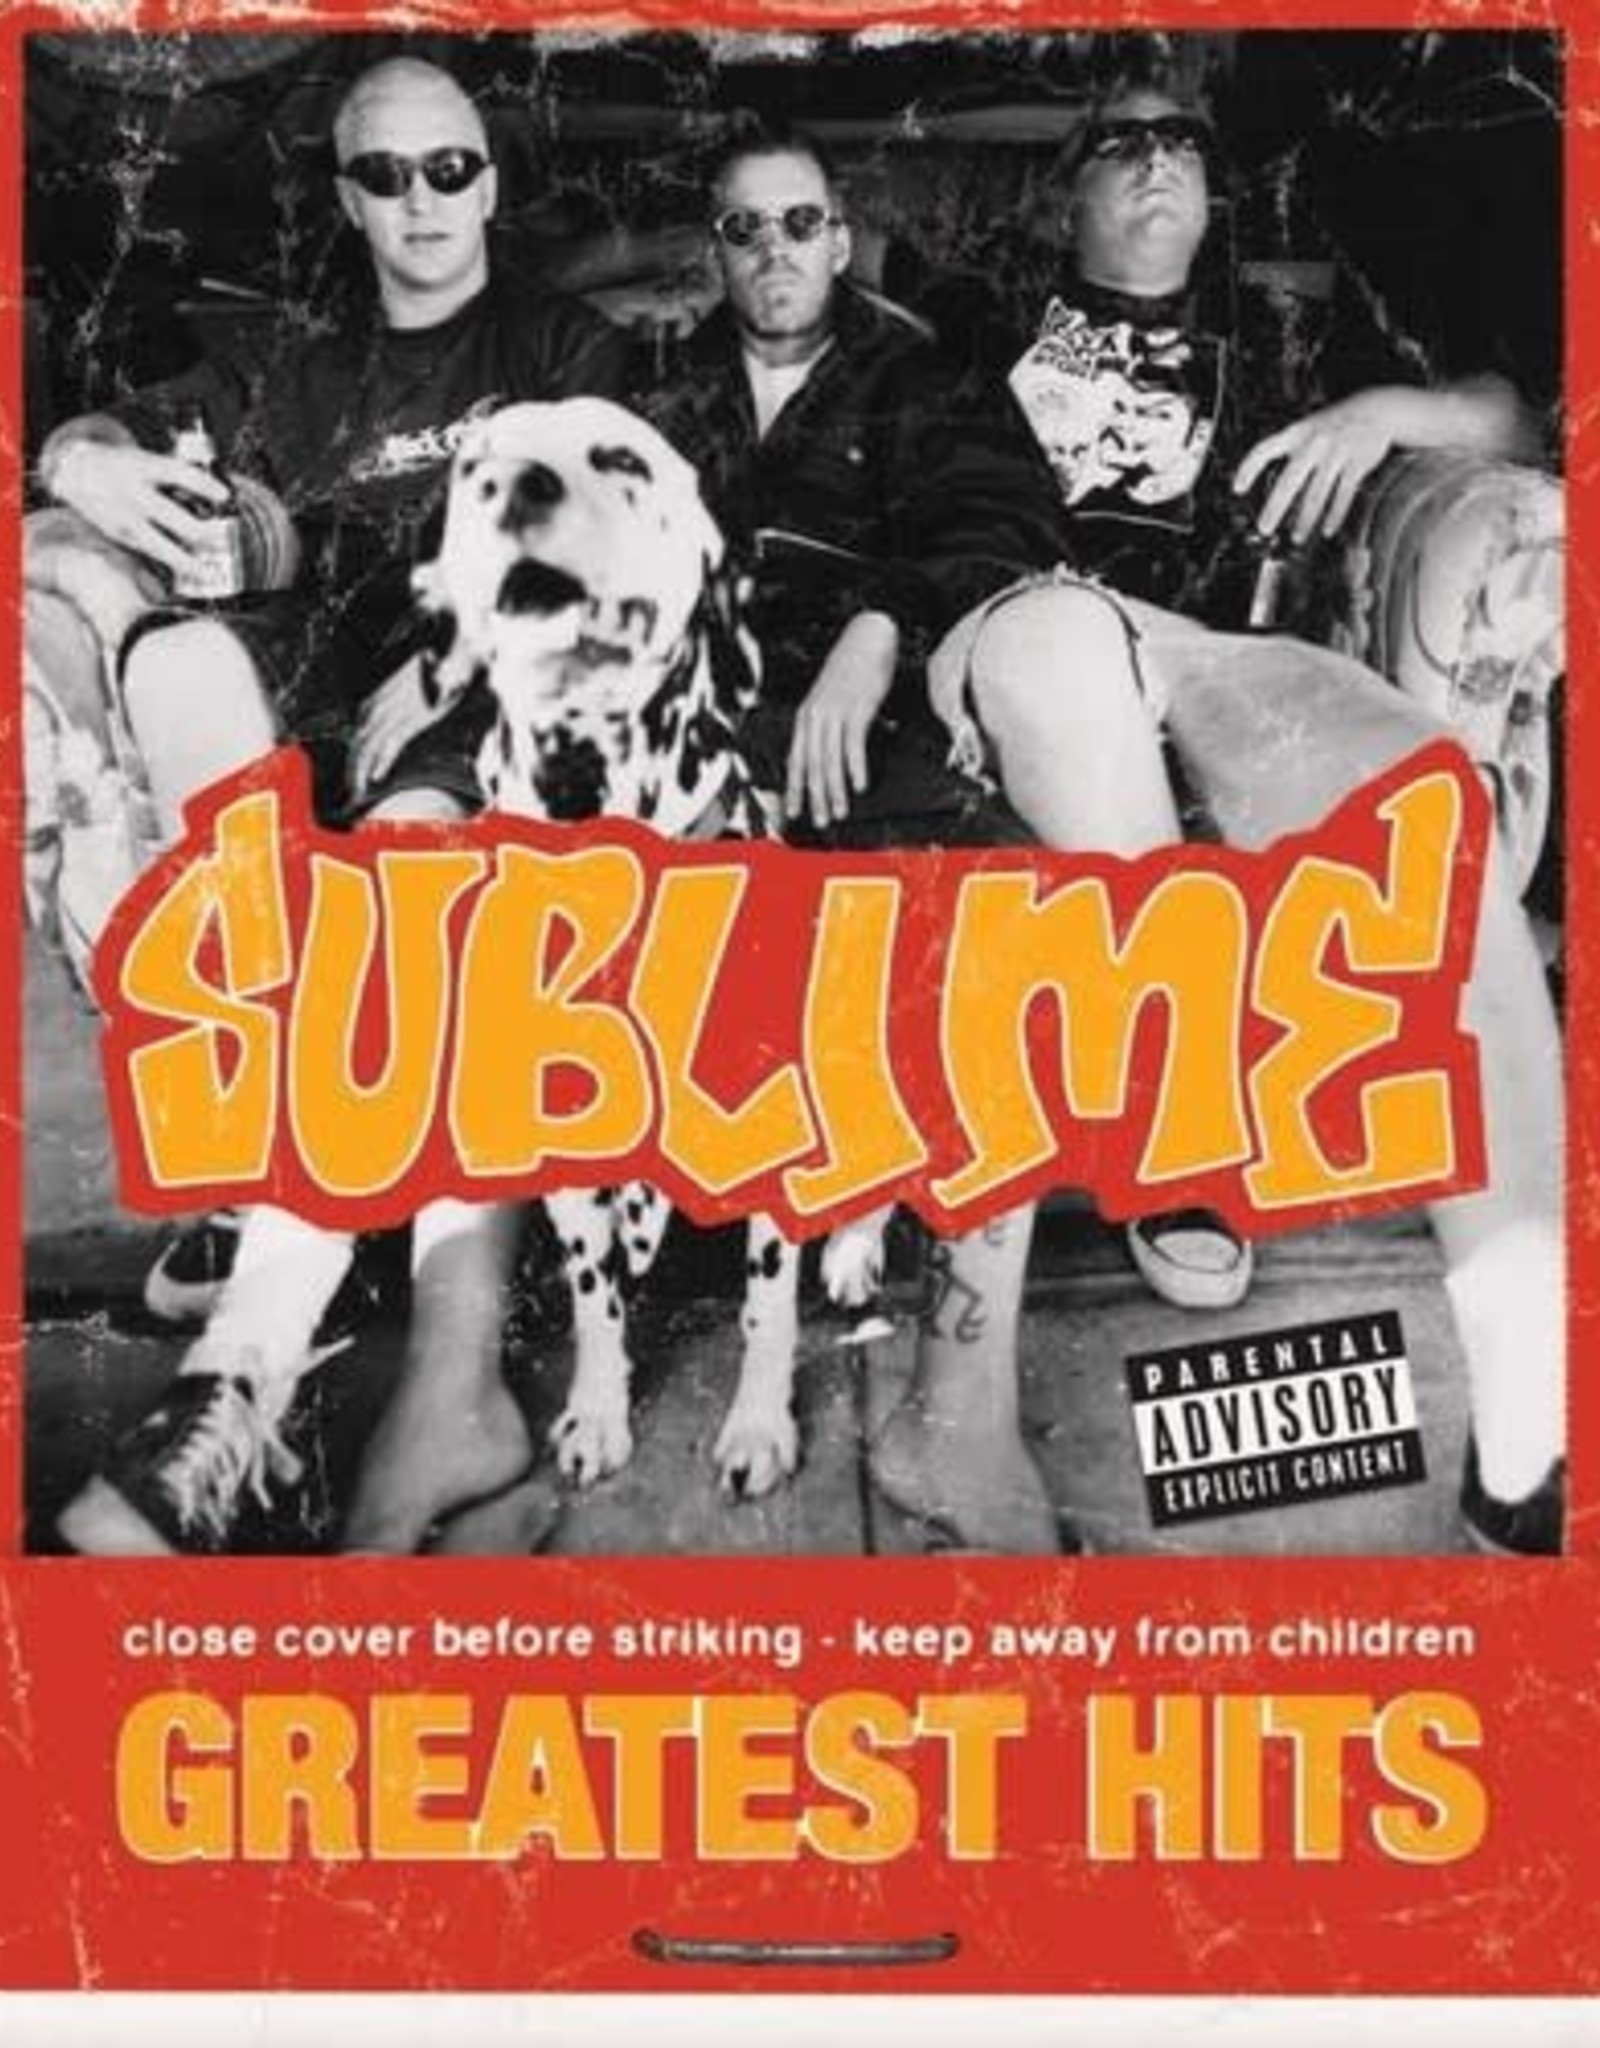 Sublime - Greatest Hits